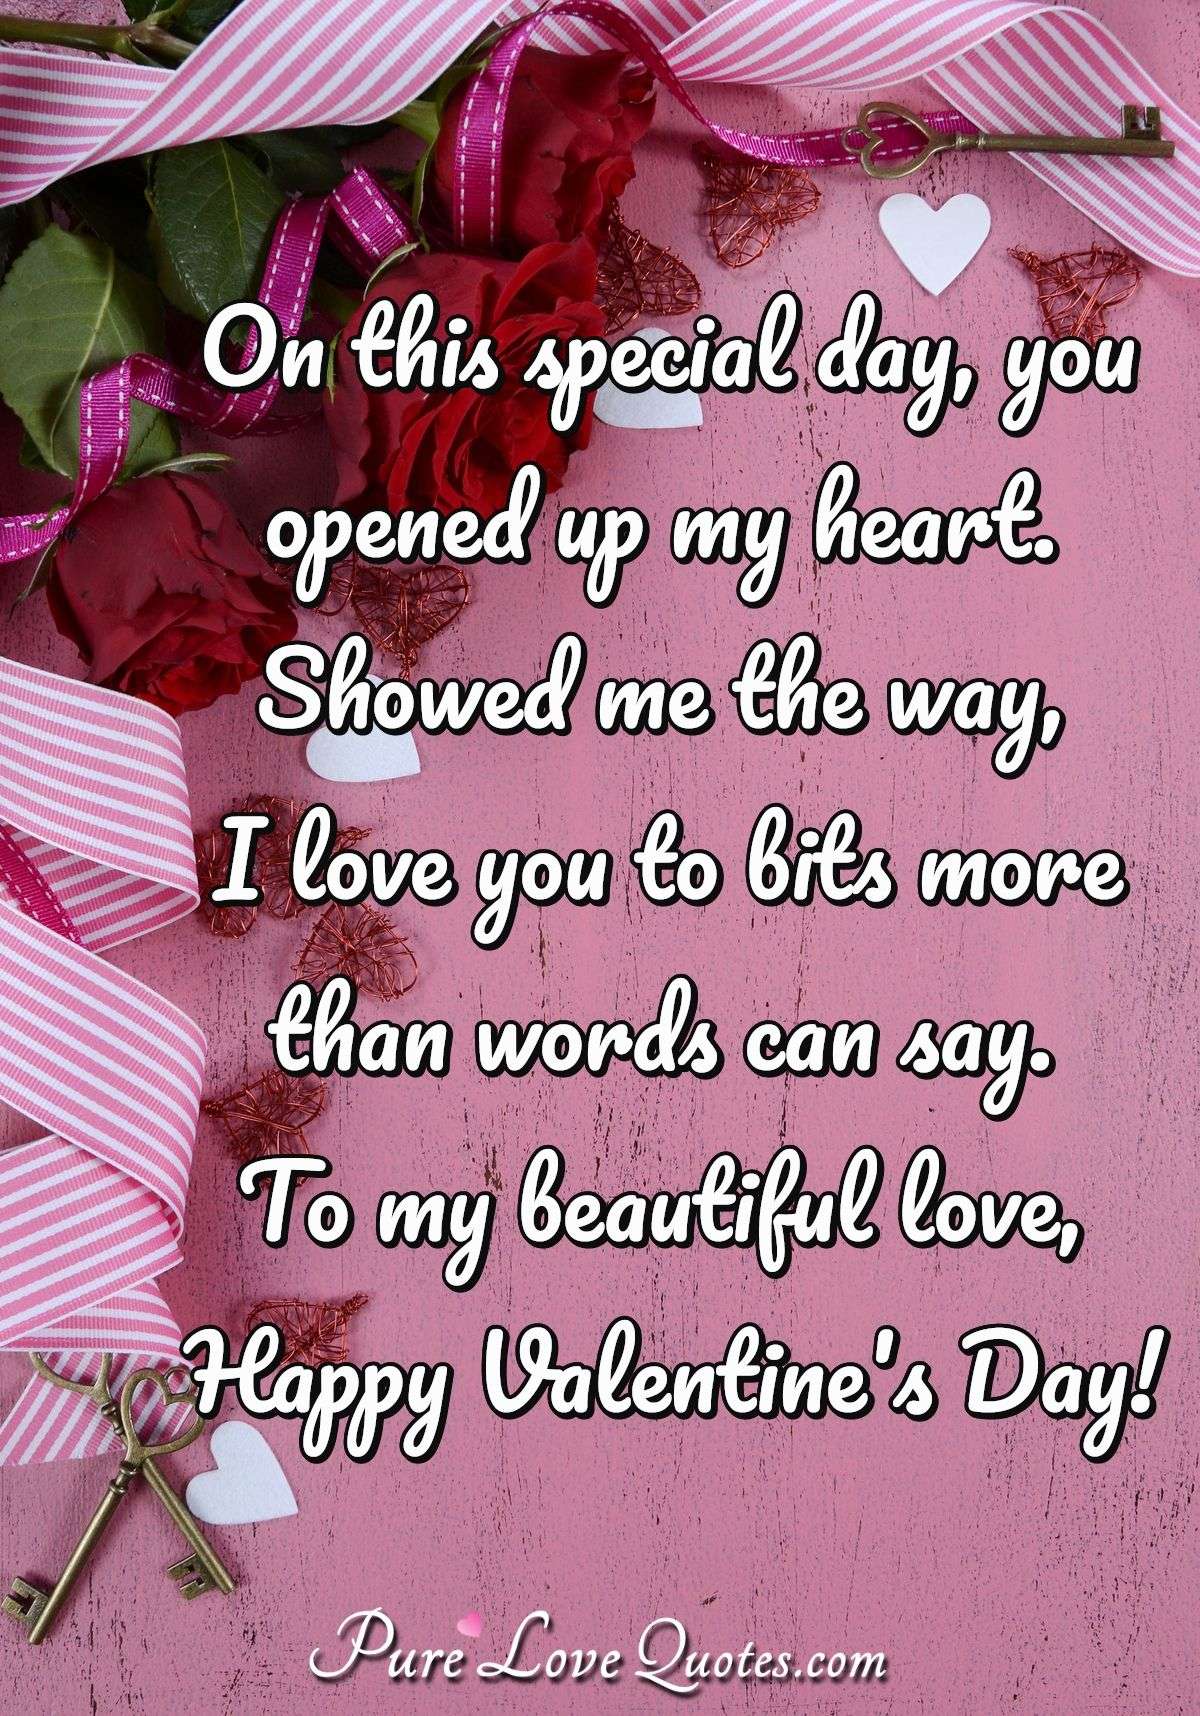 On this special day, you opened up my heart. Showed me the way, I love you to bits more than words can say. To my beautiful love, Happy Valentine's Day! - Anonymous